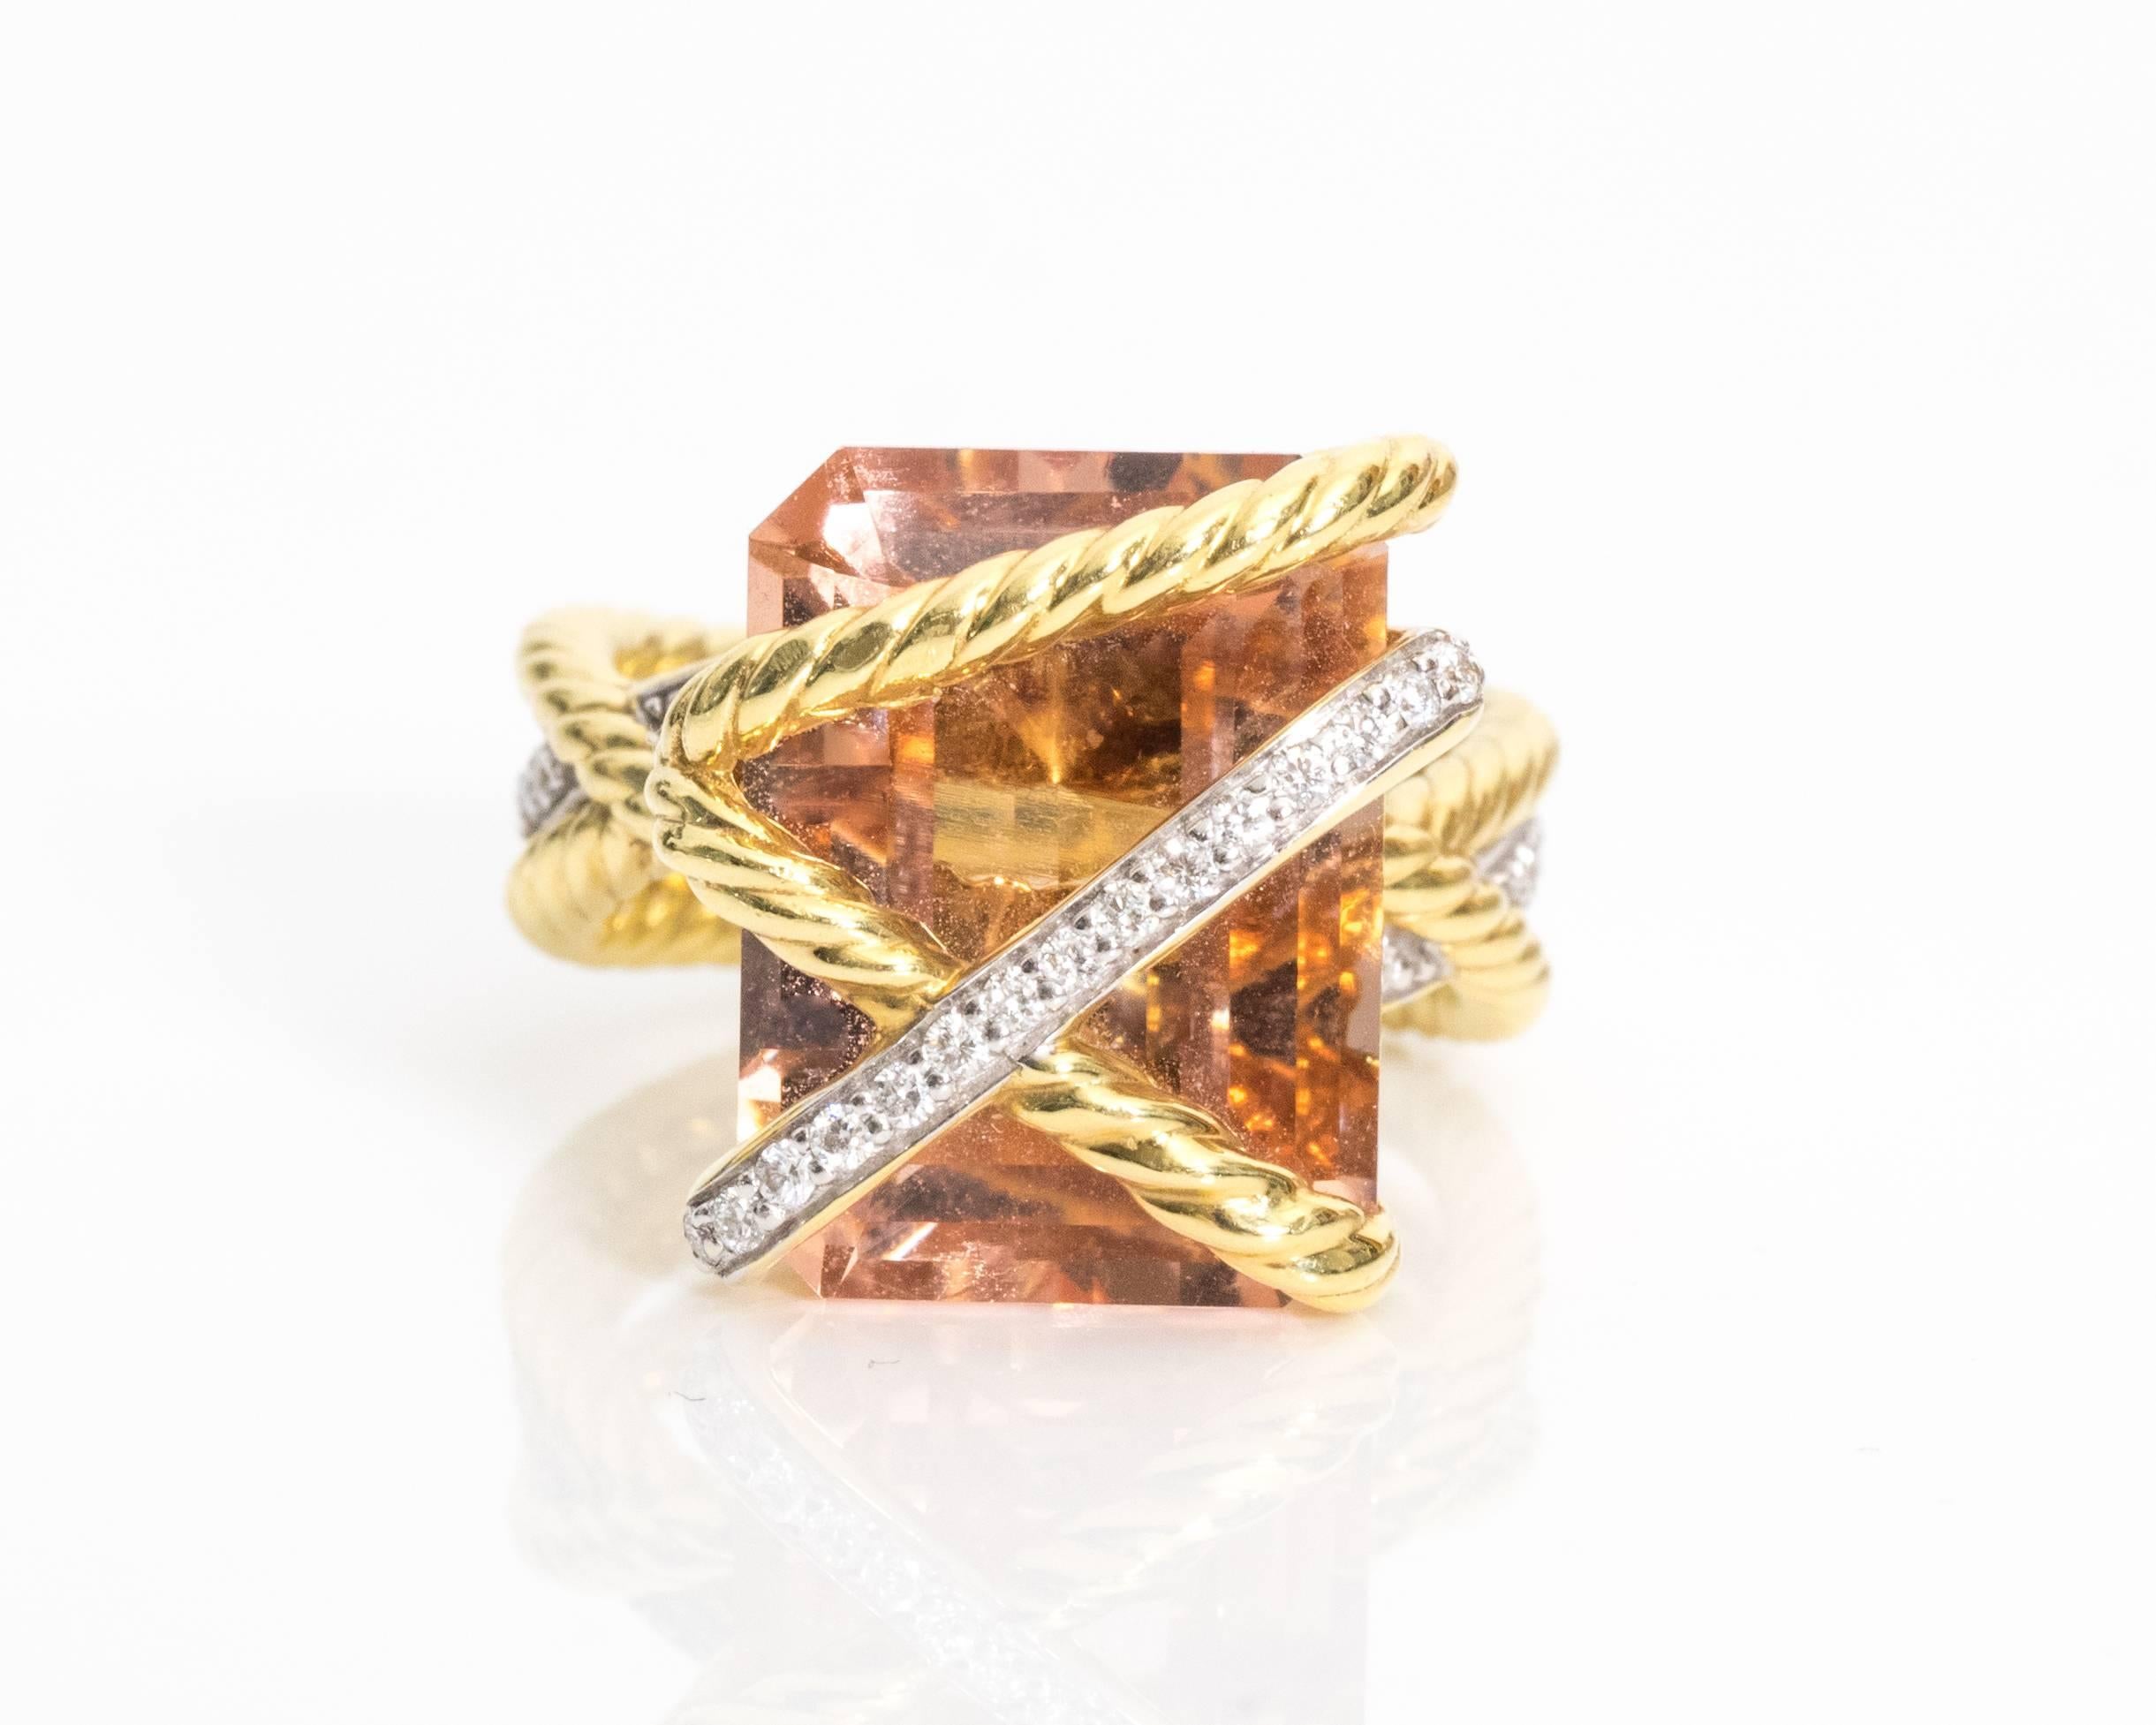 This authentic David Yurman ring has a 16 x 12 millimeter morganite center stone. This piece retails for over $4,000 currently.
Pre-Owned
Great Condition
Features three distinct braided rows - two are made of 18 karat yellow gold and the other has a